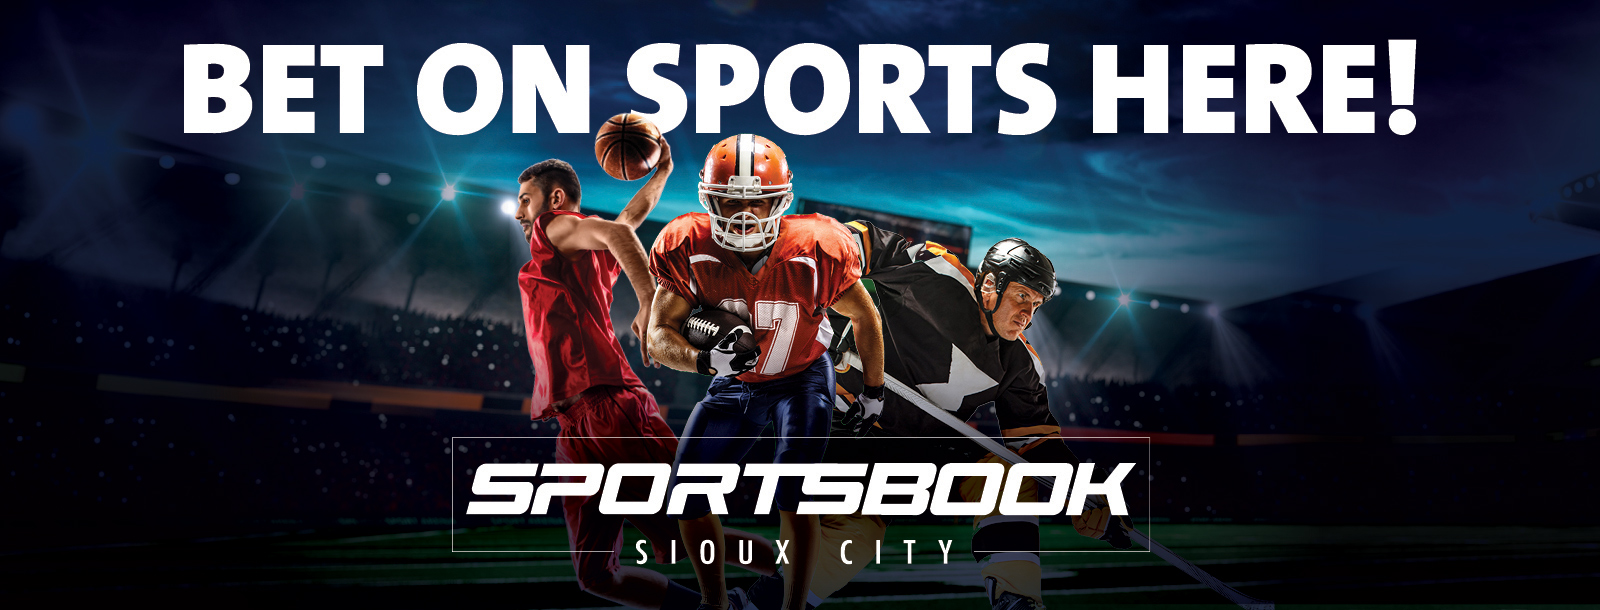 Sioux city Sportsbook bet on sports here